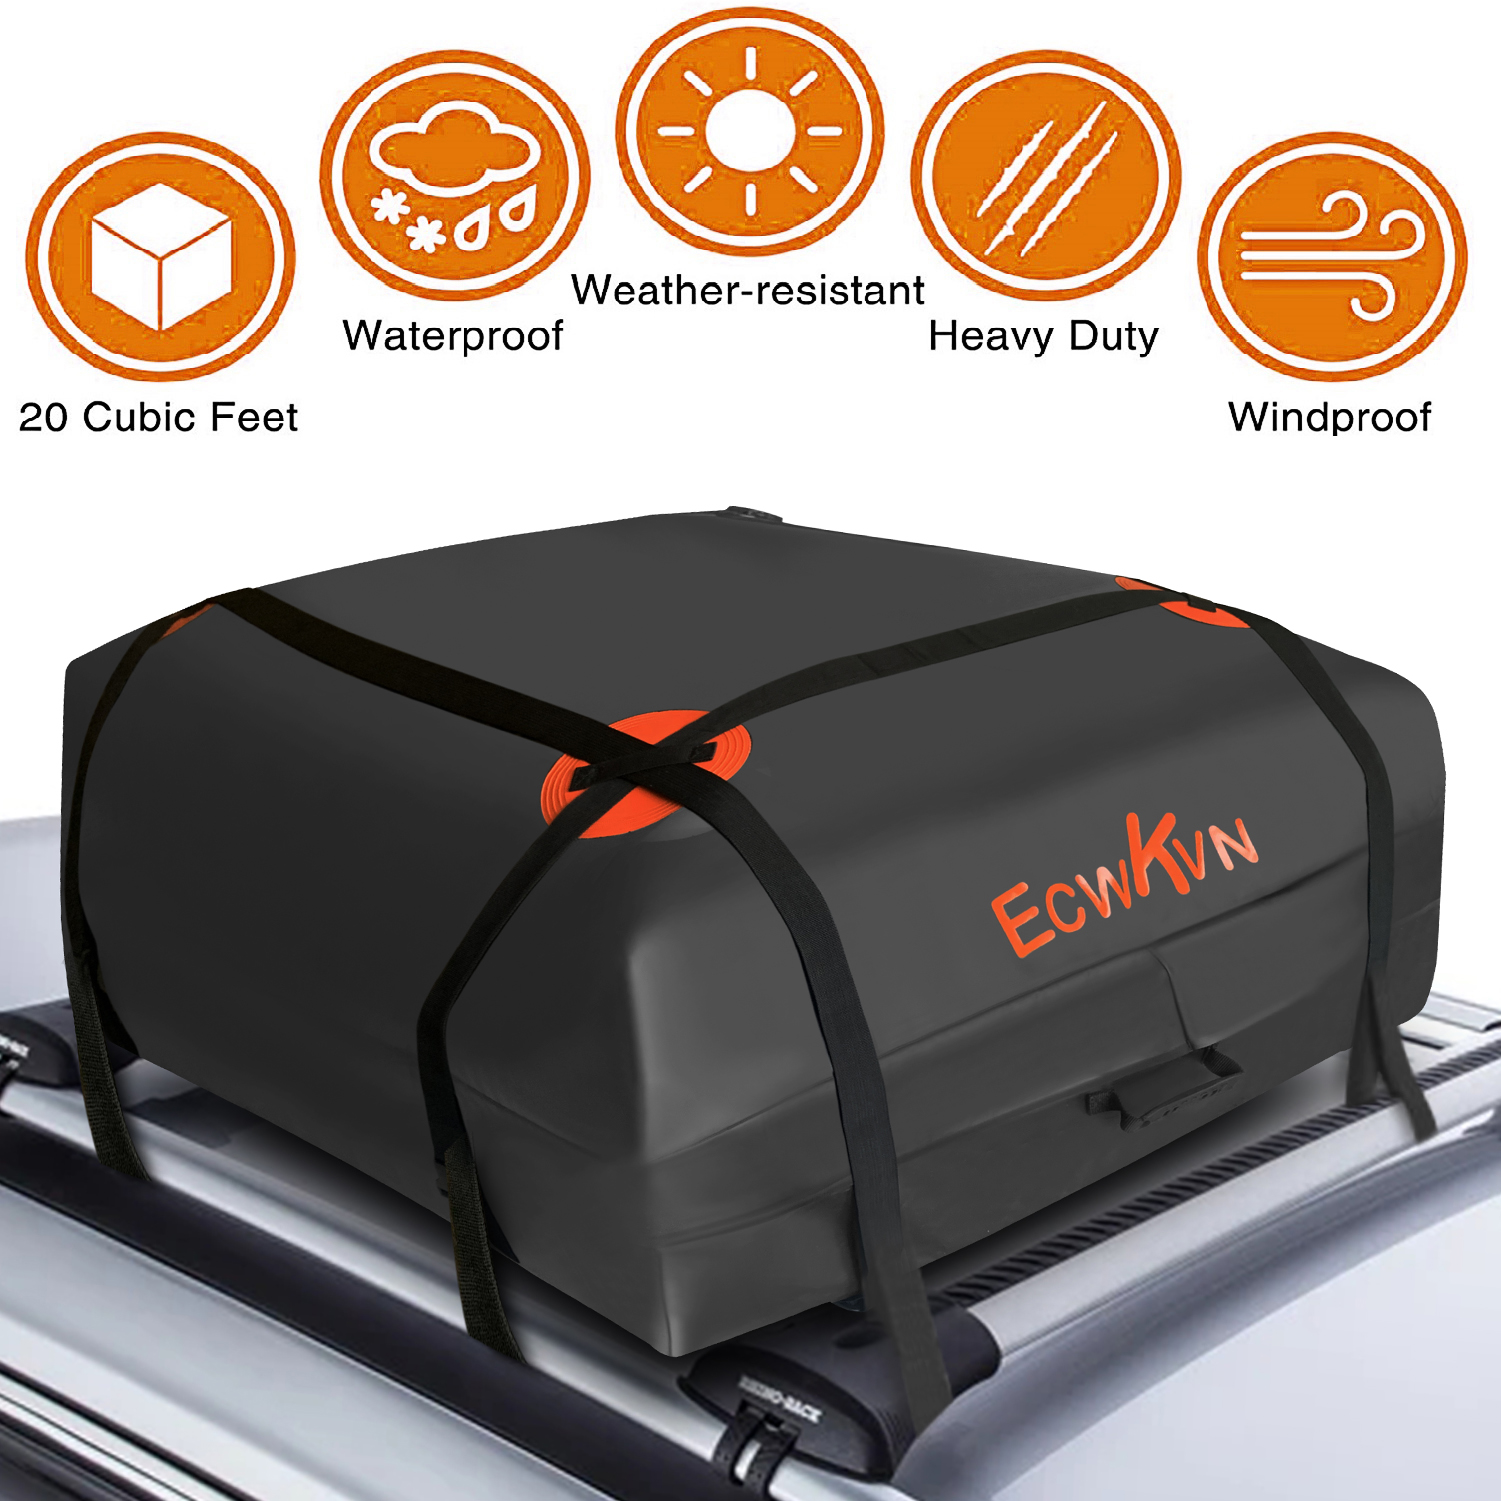 ECWKVN Car Cargo Roof Bag Bundle Storage Bag 100% Waterproof Rooftop Cargo Bag for All Vehicles with/Without Rack Crossbars Heavy Duty Roof Cargo Carrier Bag 20 Cubic Feet 